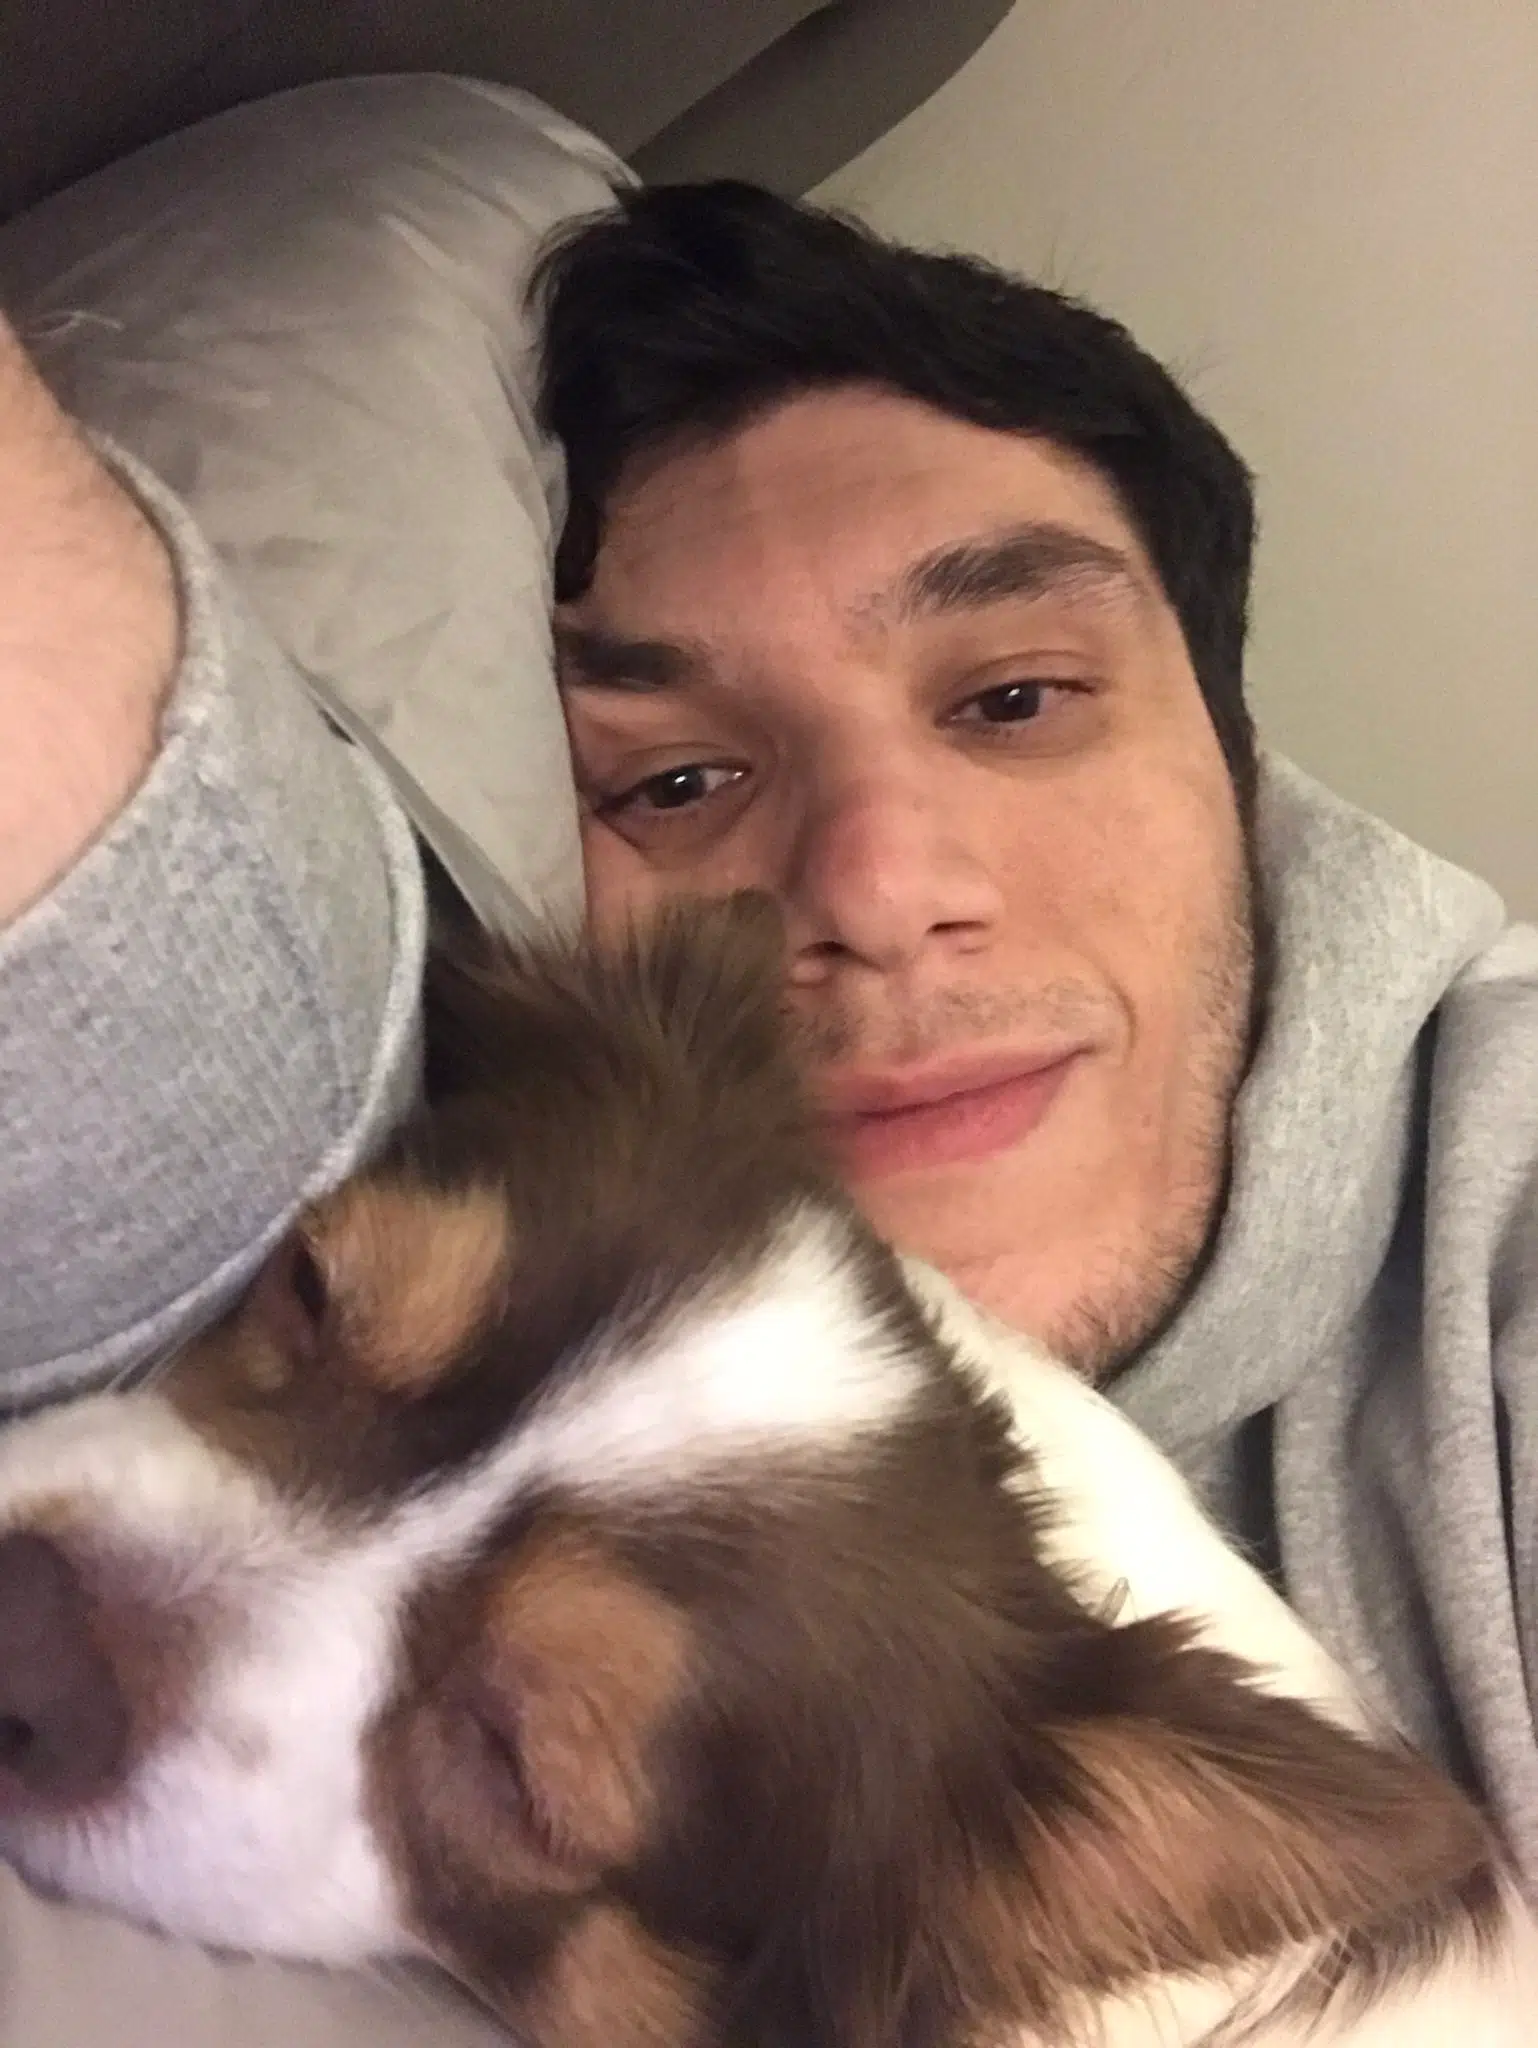 trainwreckstv in bed with pet dog